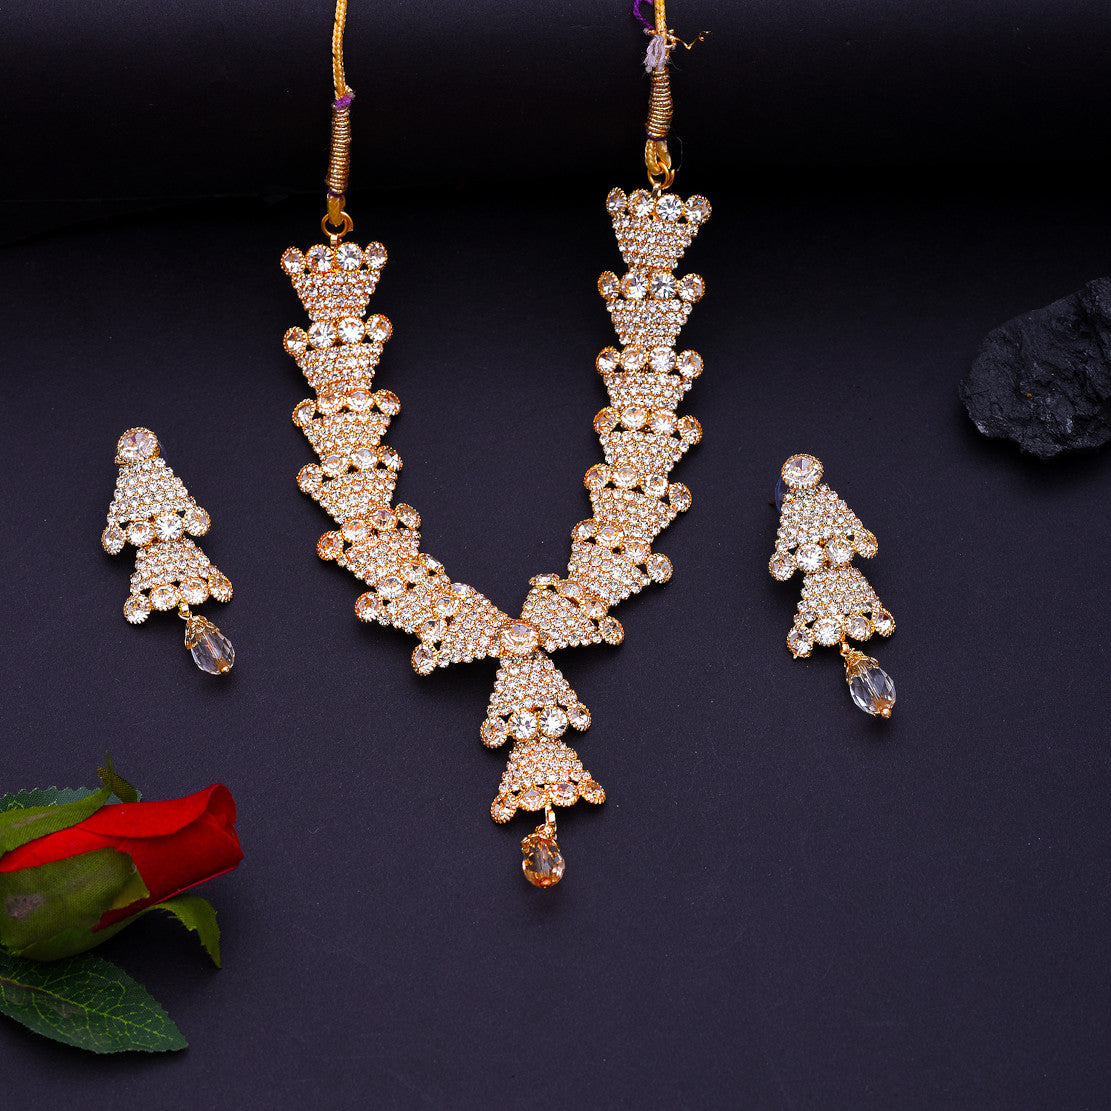 Traditional Designed by Handcrafted Necklace with Earrings for Women | Buy This Necklace Online from Mekkna